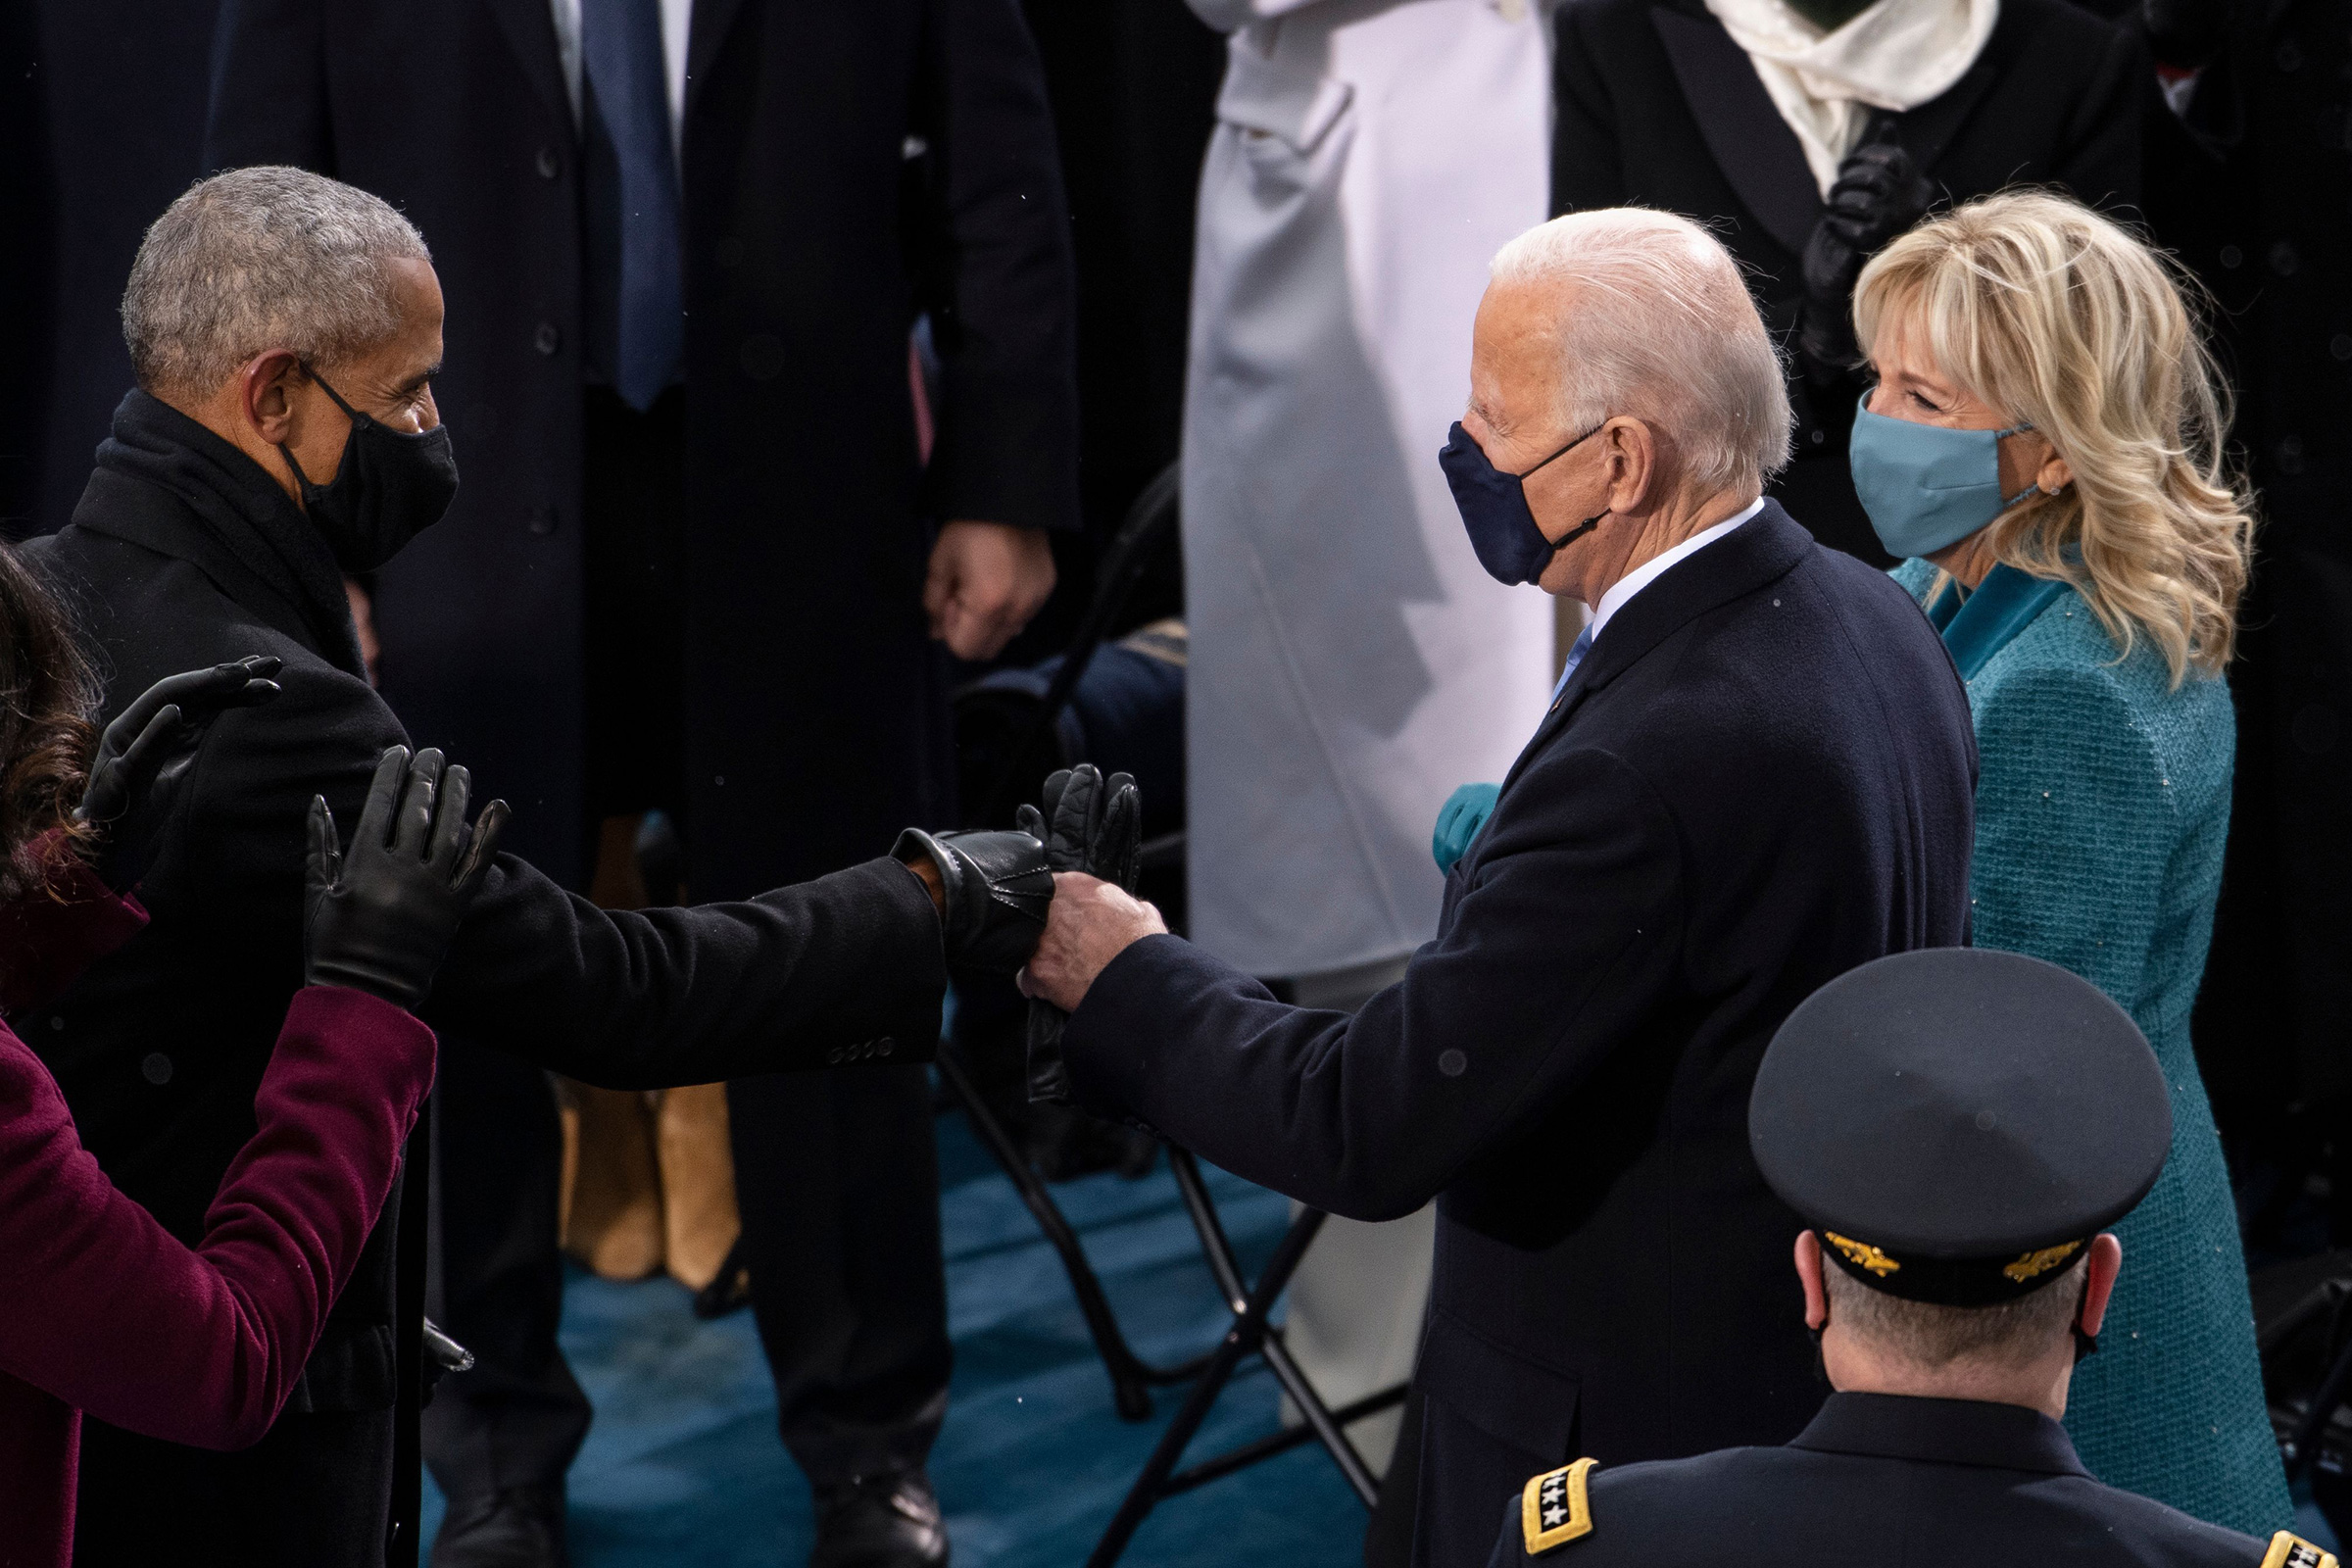 President-elect Joe Biden greets President Barack Obama as he arrives to the West Front of the Capitol. (Caroline Brehman—CQ Roll Call/Shutterstock)